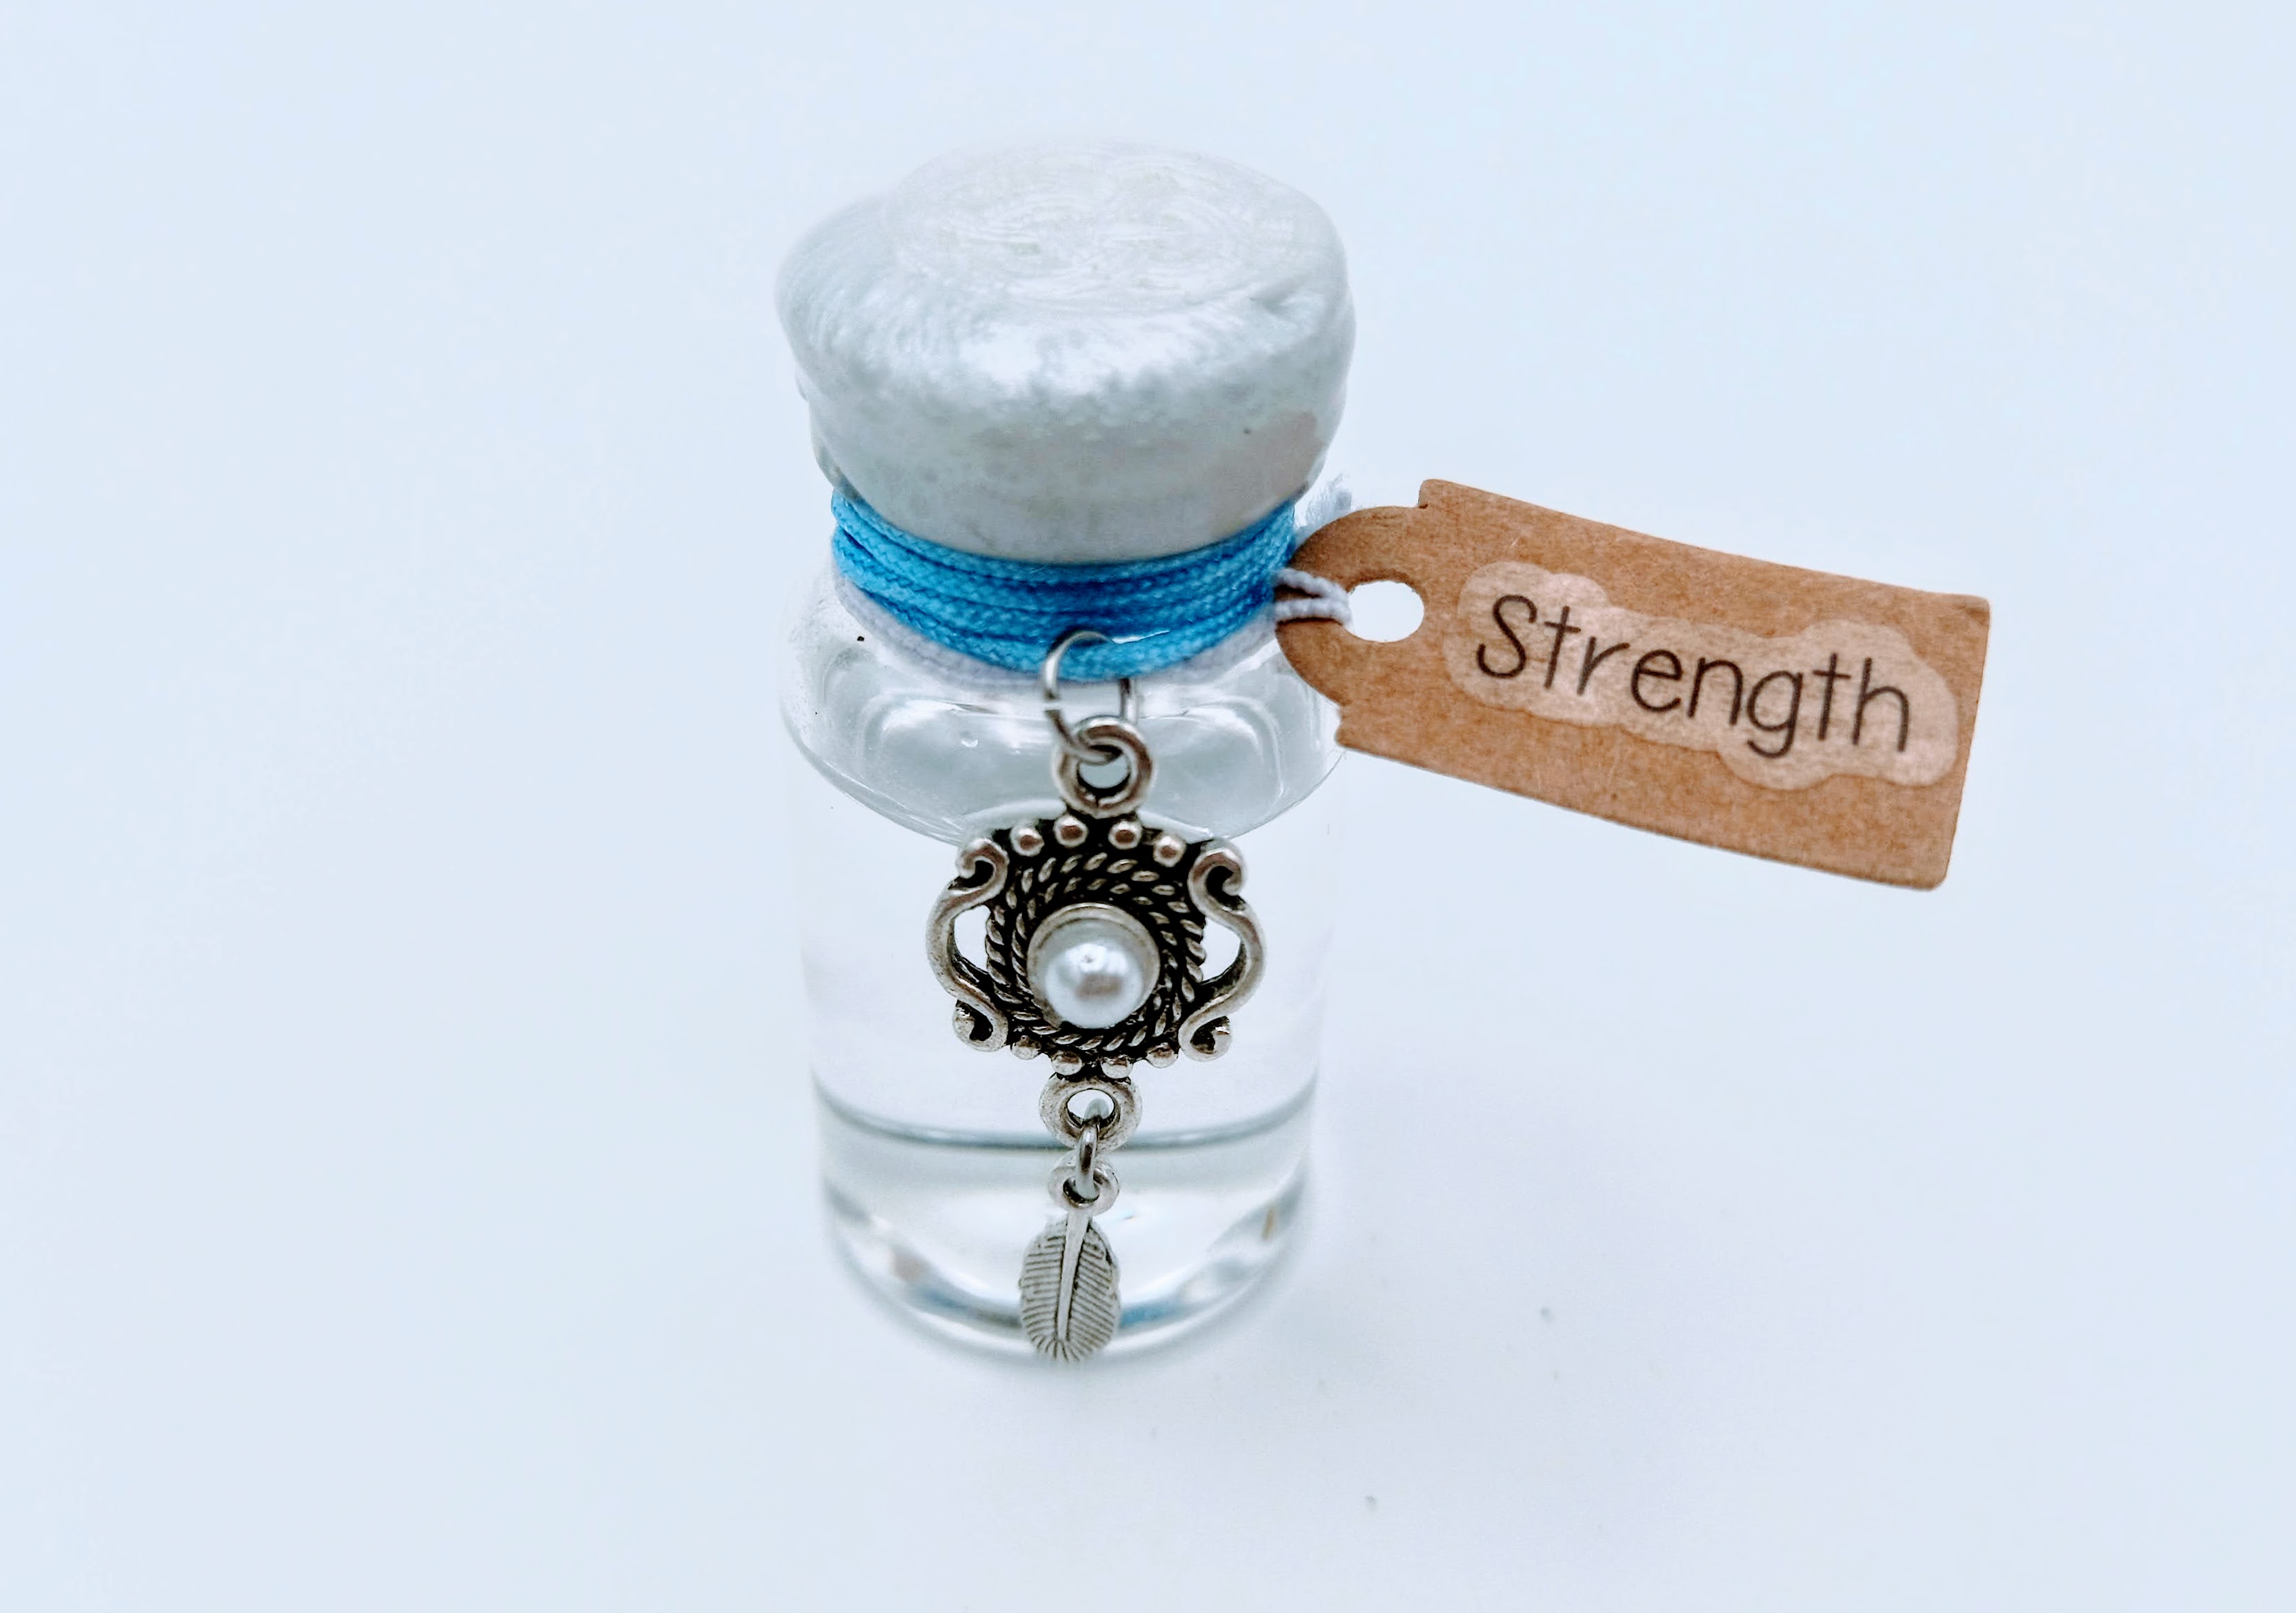 VIAL* Protection and Strength - Vial filled with St.Brigid Well Water from an Irish Holy Well.